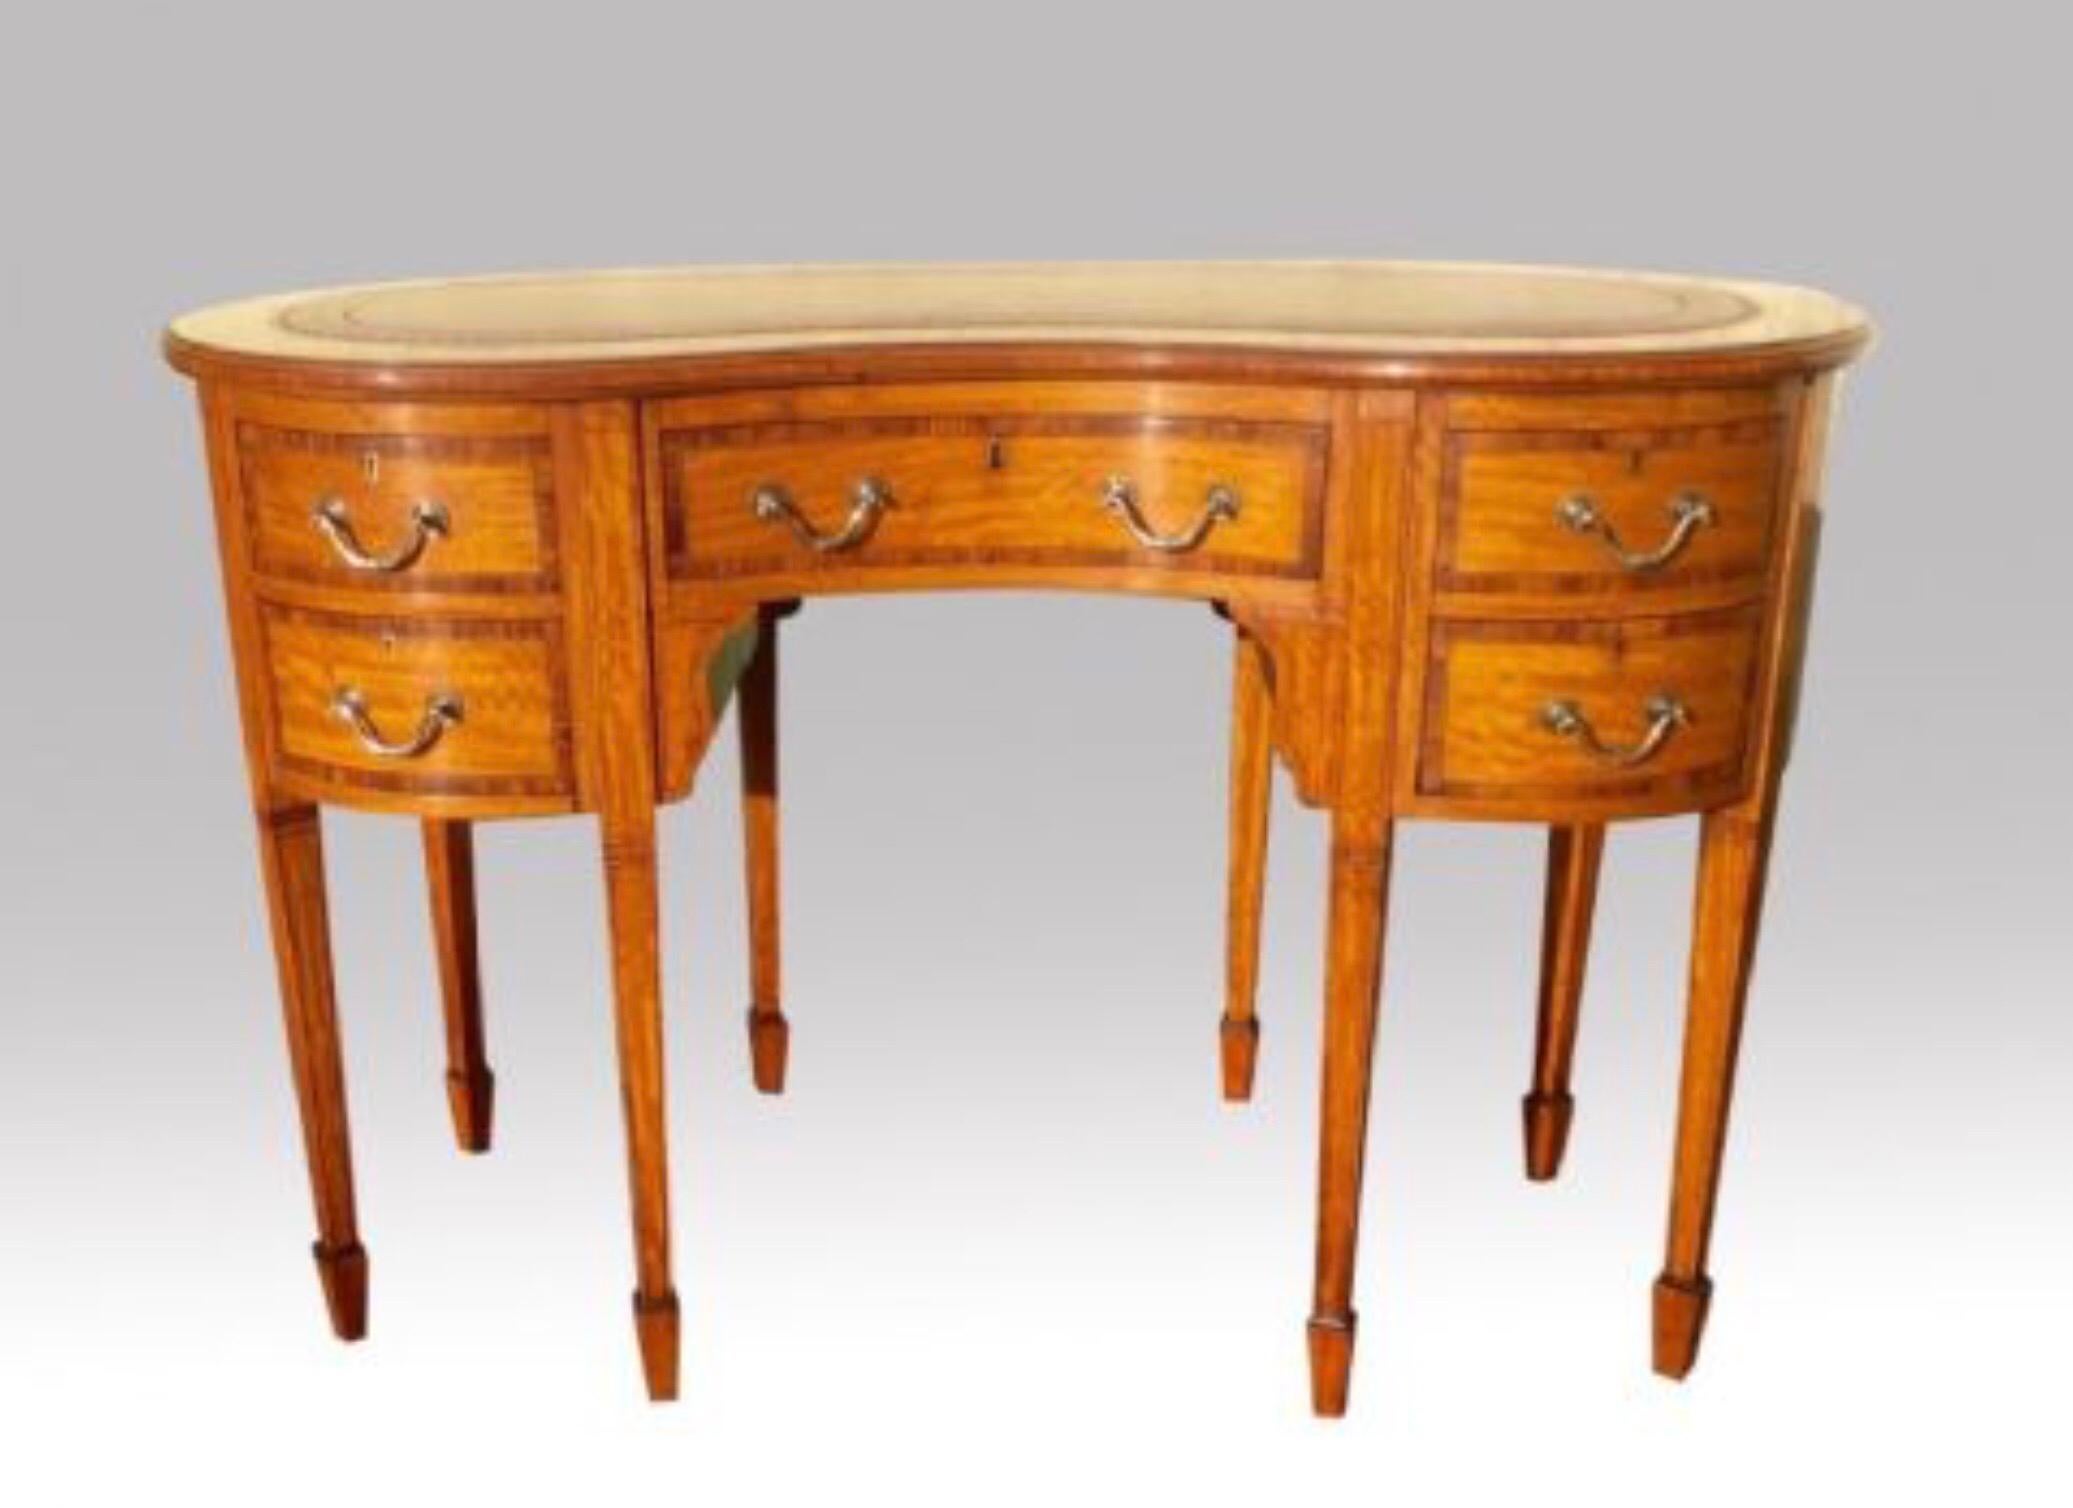 A stunning Quality antique Inlaid Satinwood and Kingwood banded kidney shape desk of Petite Proportions with Burgandy leather tooled hide.
Mahogany lined drawers.
(This antique desk is in fabulous condition)
Circa 1890
Measures: 47.5 ins x